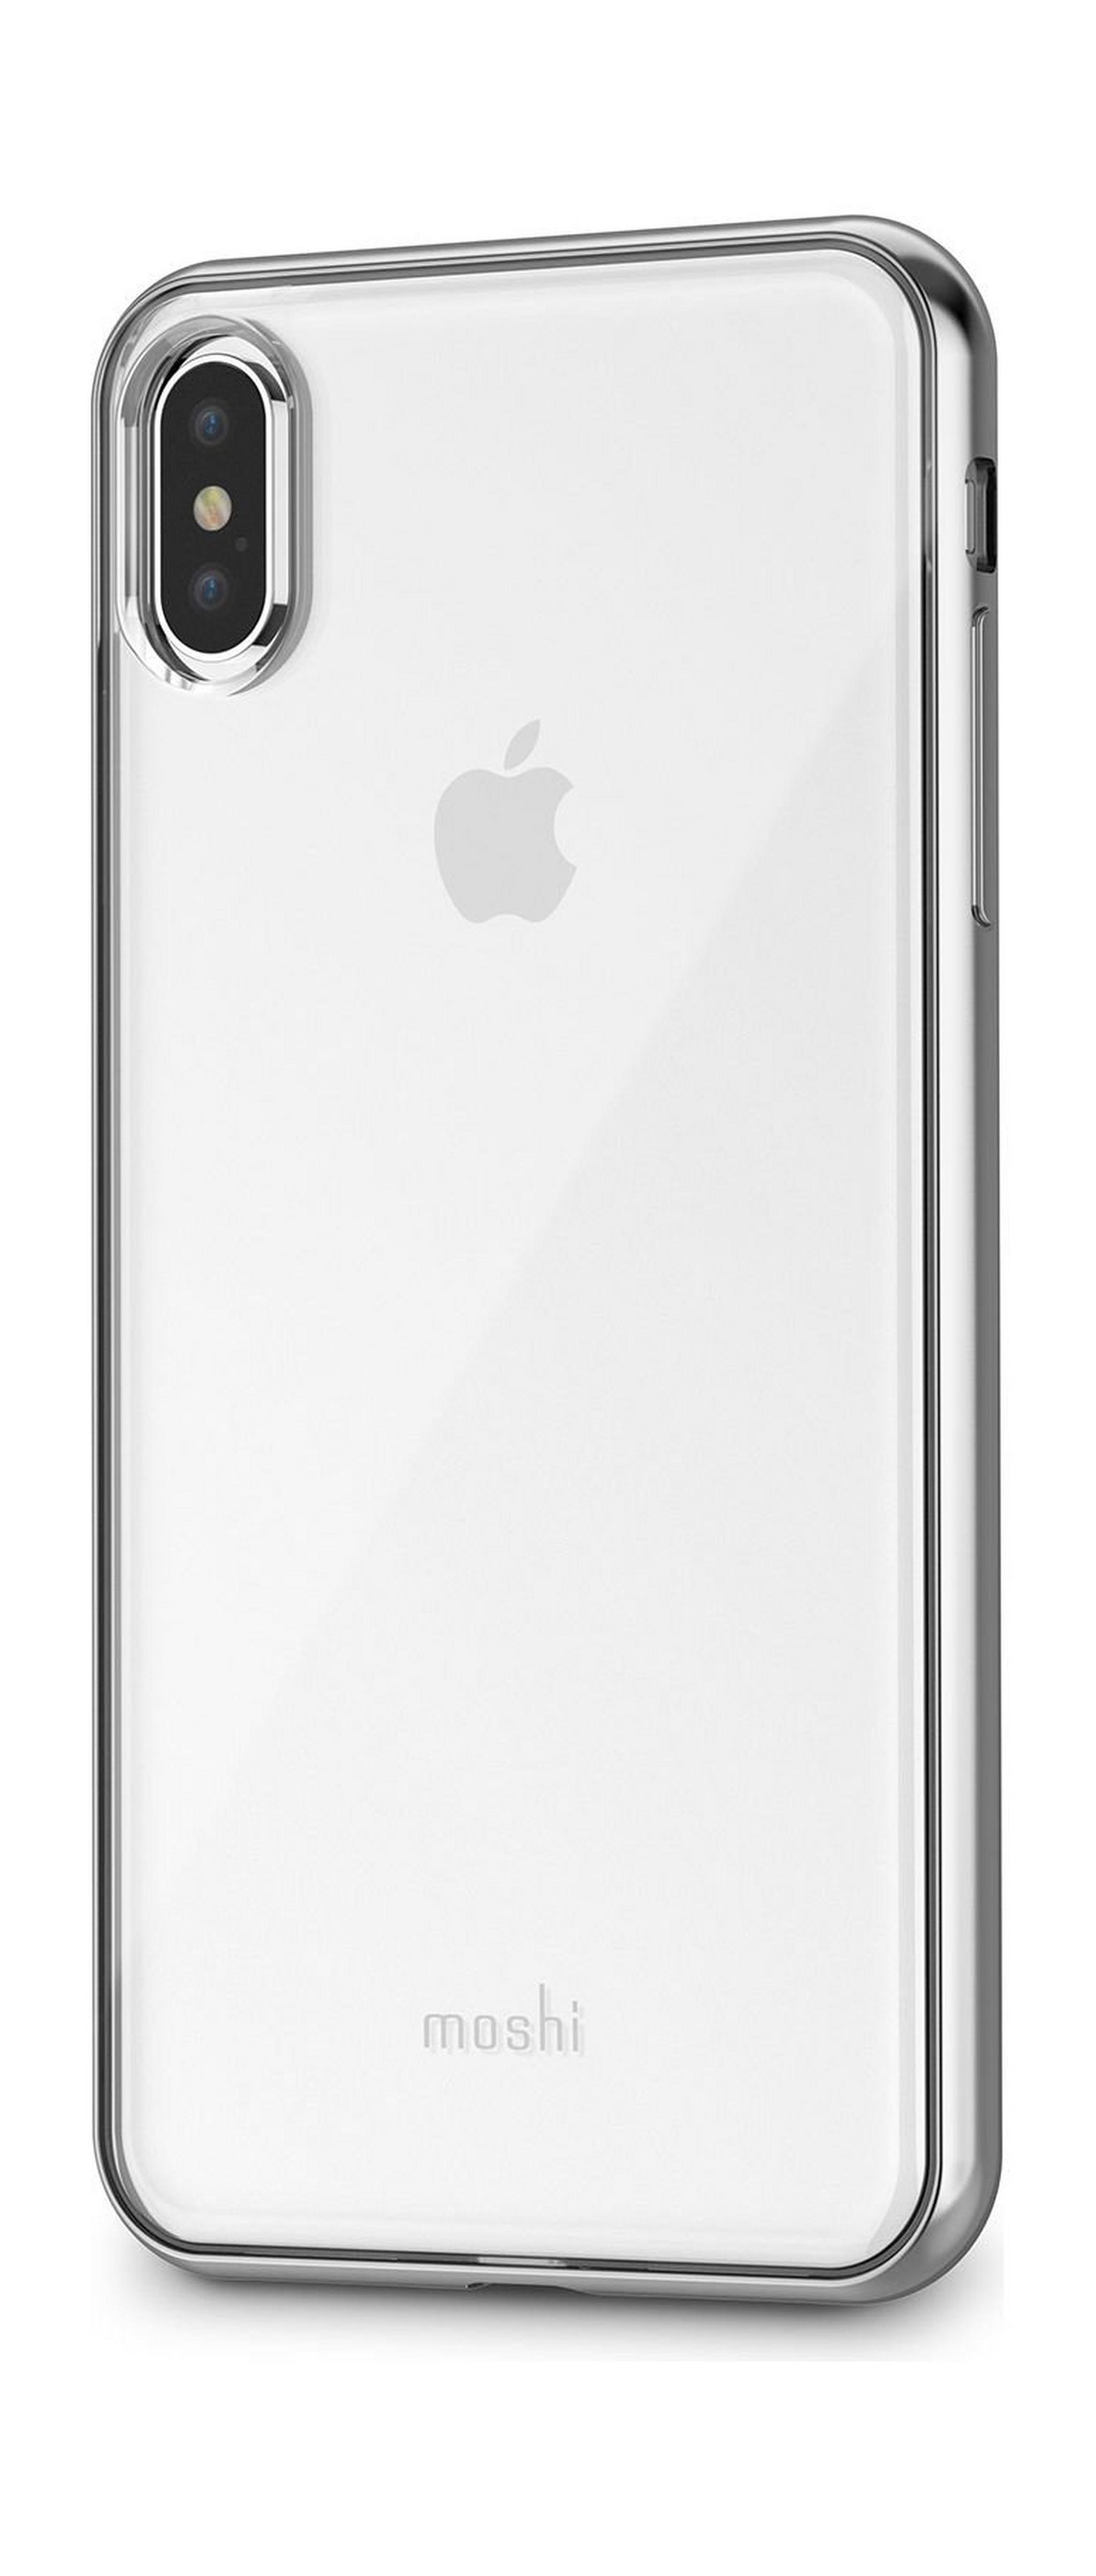 Moshi Vitros Clear Case for Apple iPhone XS MAX - Jet Silver